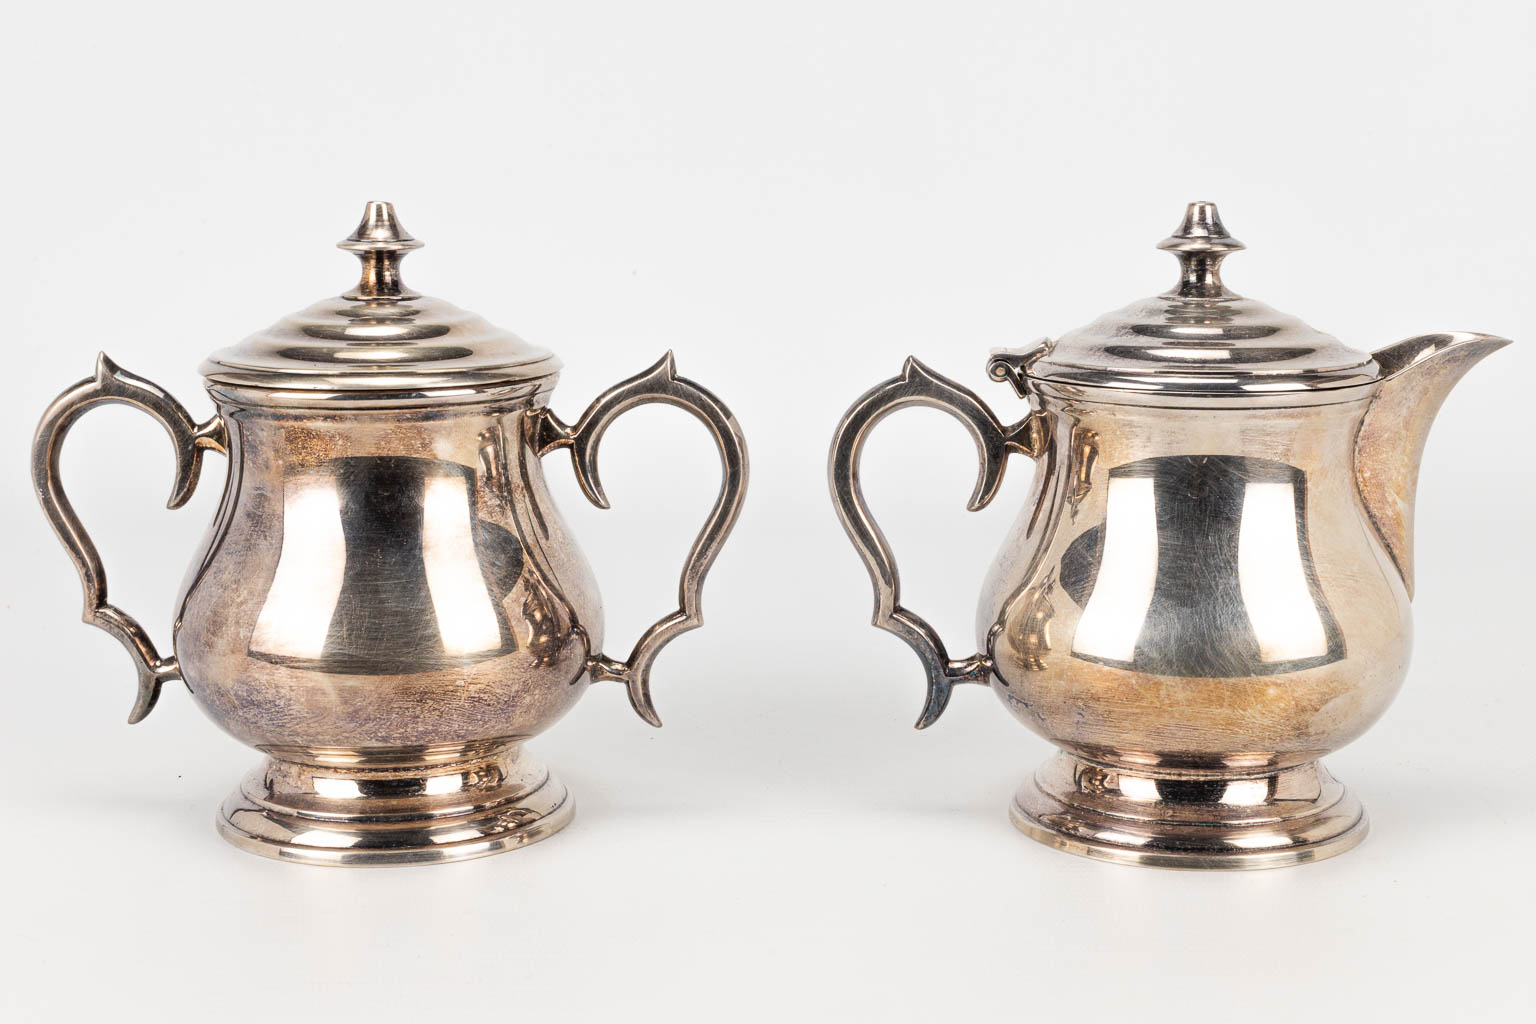 A coffee and tea service made of silver-plated metal. 